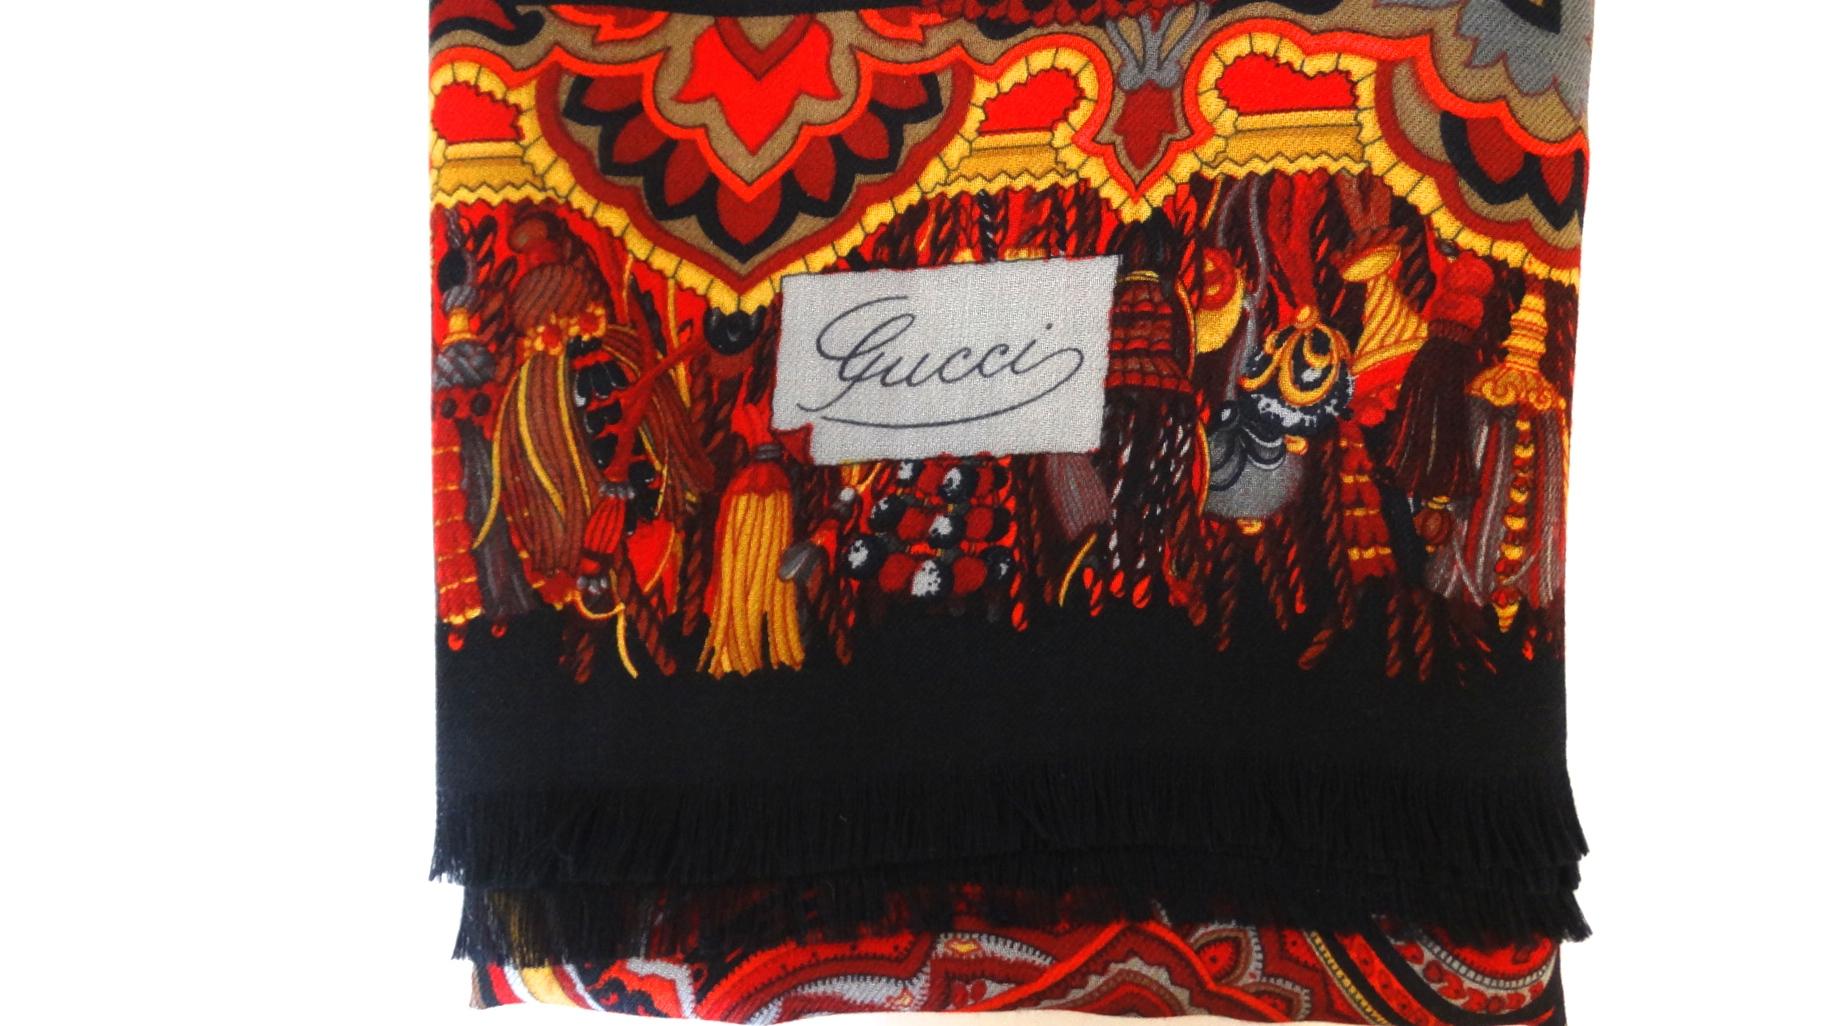 Amazing 1980s Gucci red paisley print shawl! Solid red background printed all over with an ornate persian rug inspired pattern! Super soft with lightly frayed black fringe all along the perimeter. Signed Gucci in cursive on the bottom corner. 